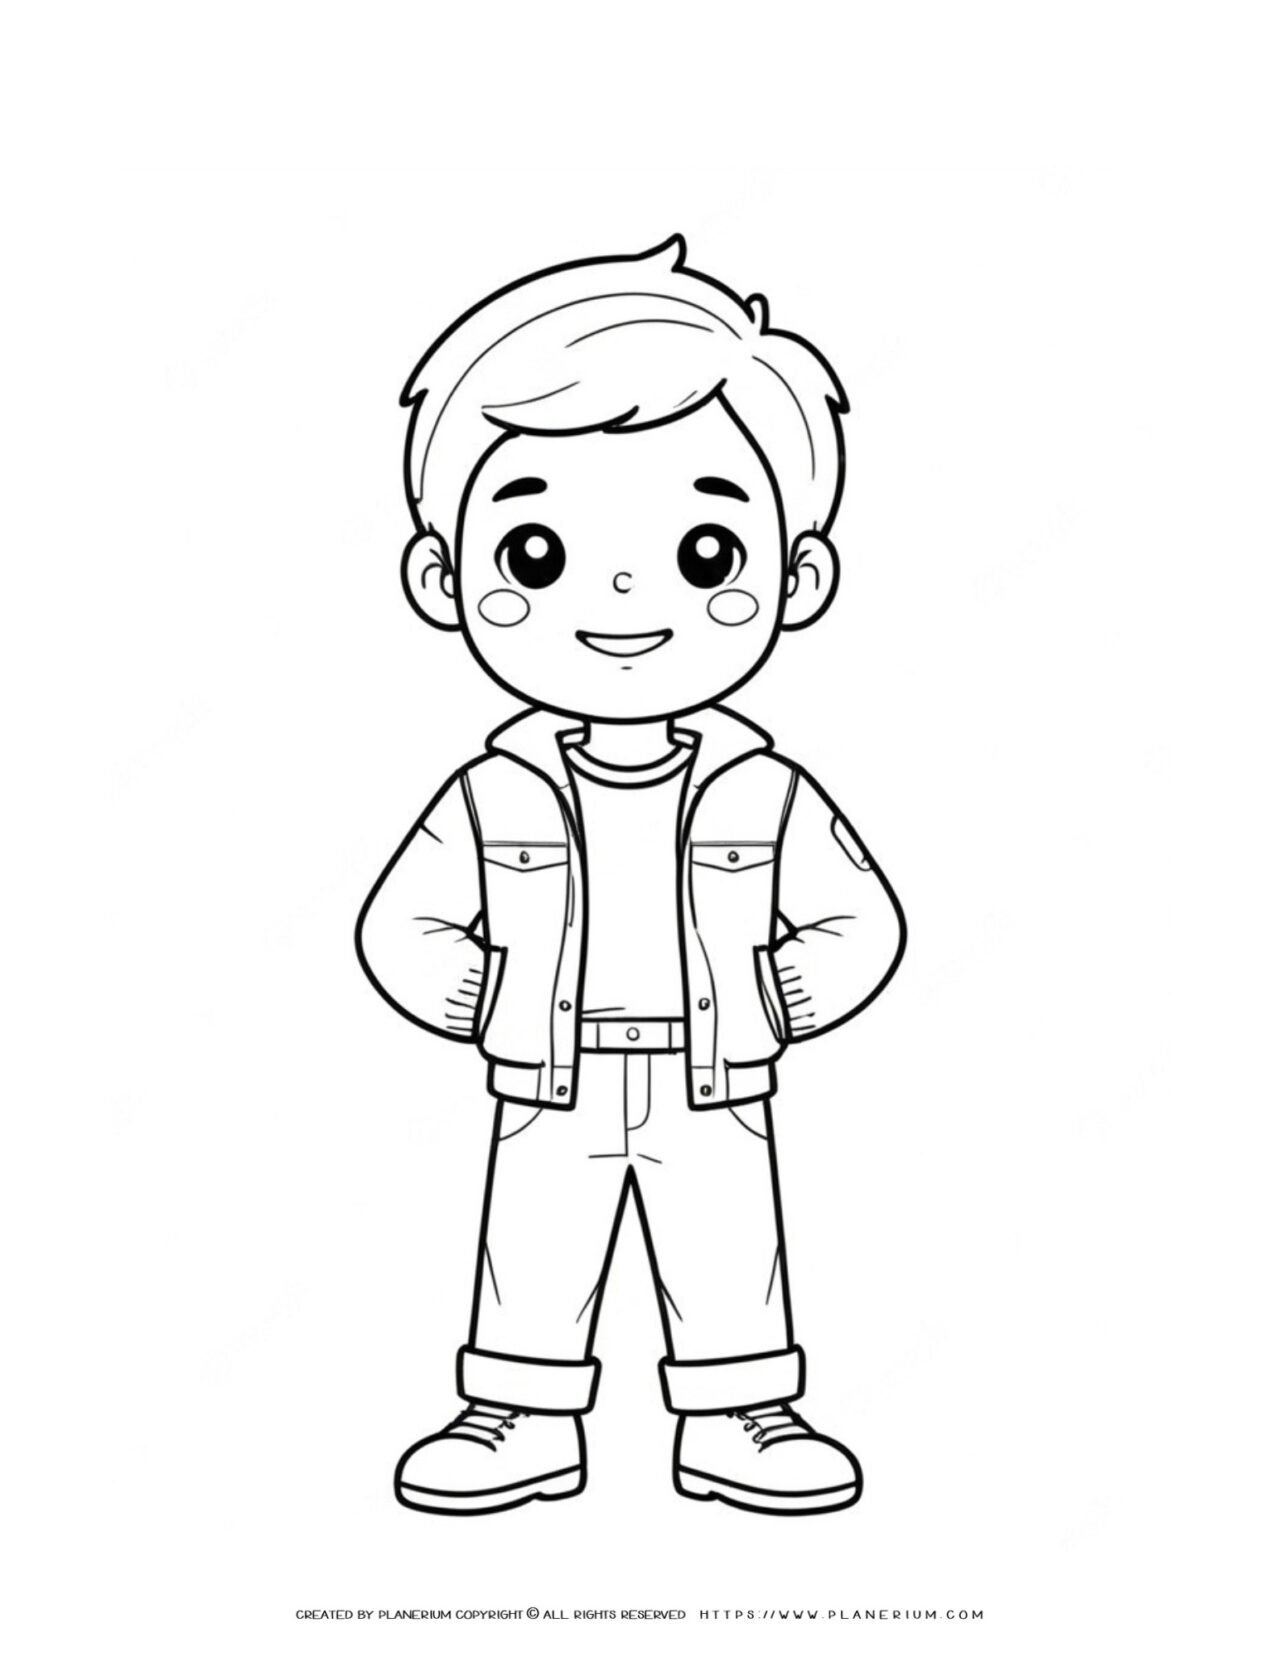 cute-boy-with-jacket-simple-coloring-page-for-kids